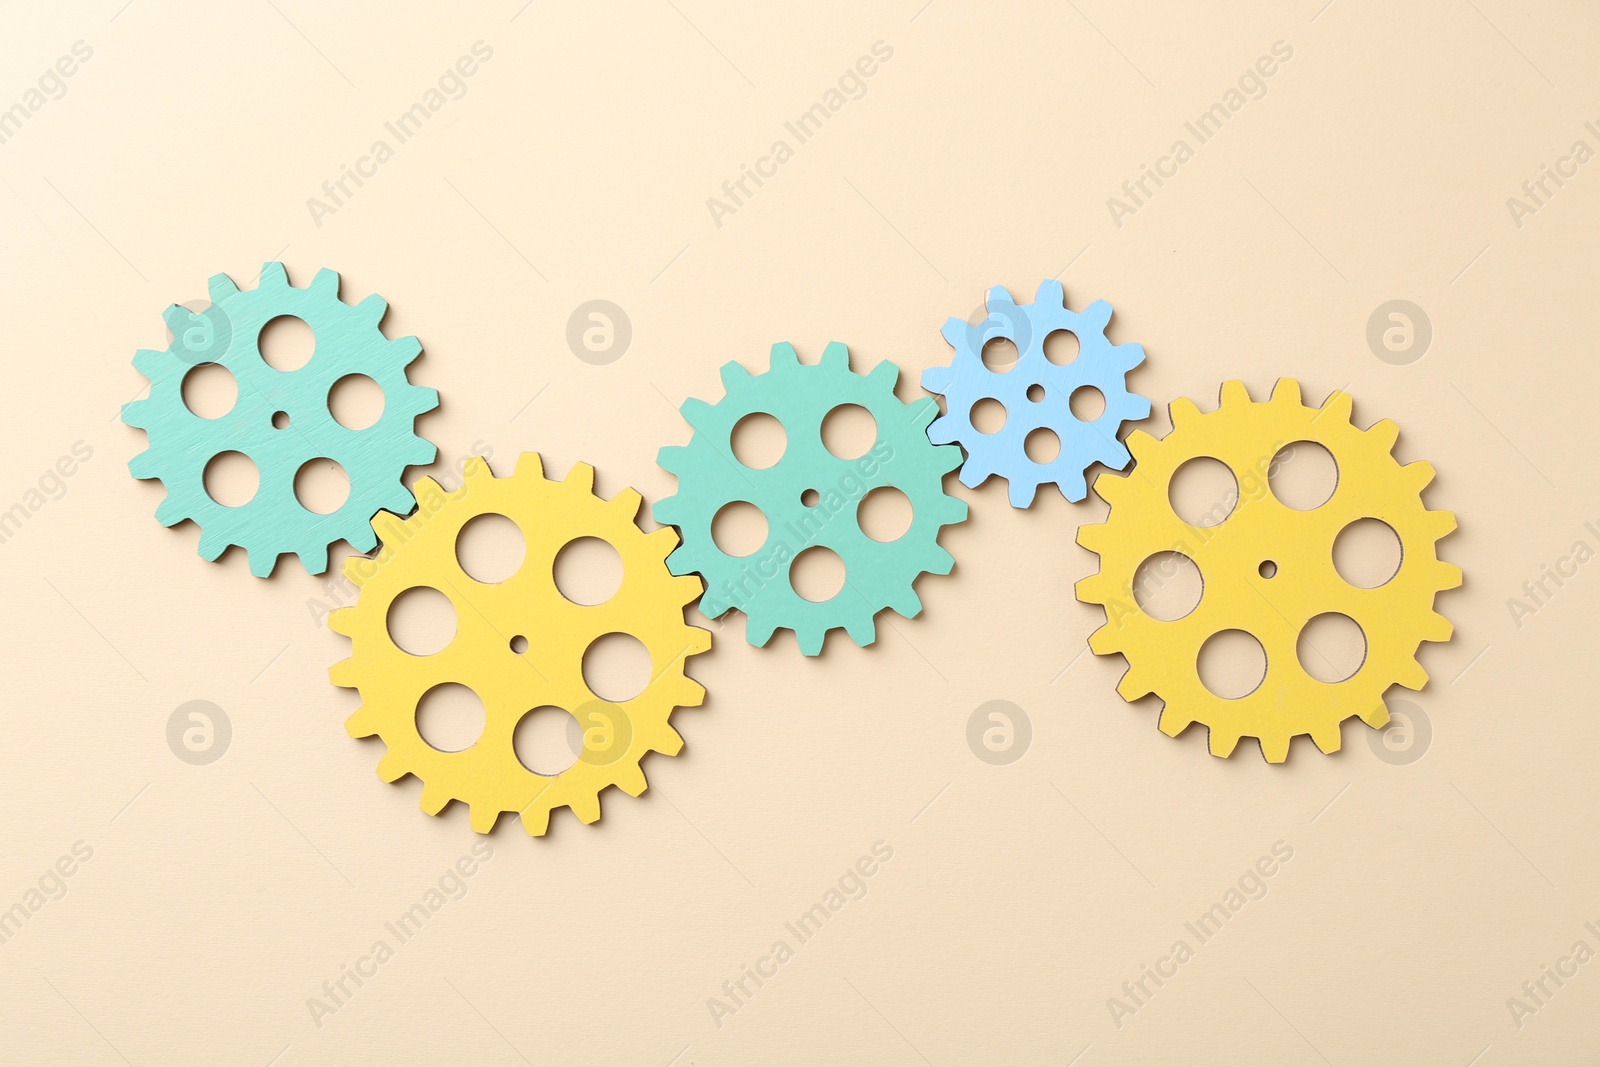 Photo of Business process organization and optimization. Scheme with colorful figures on beige background, top view